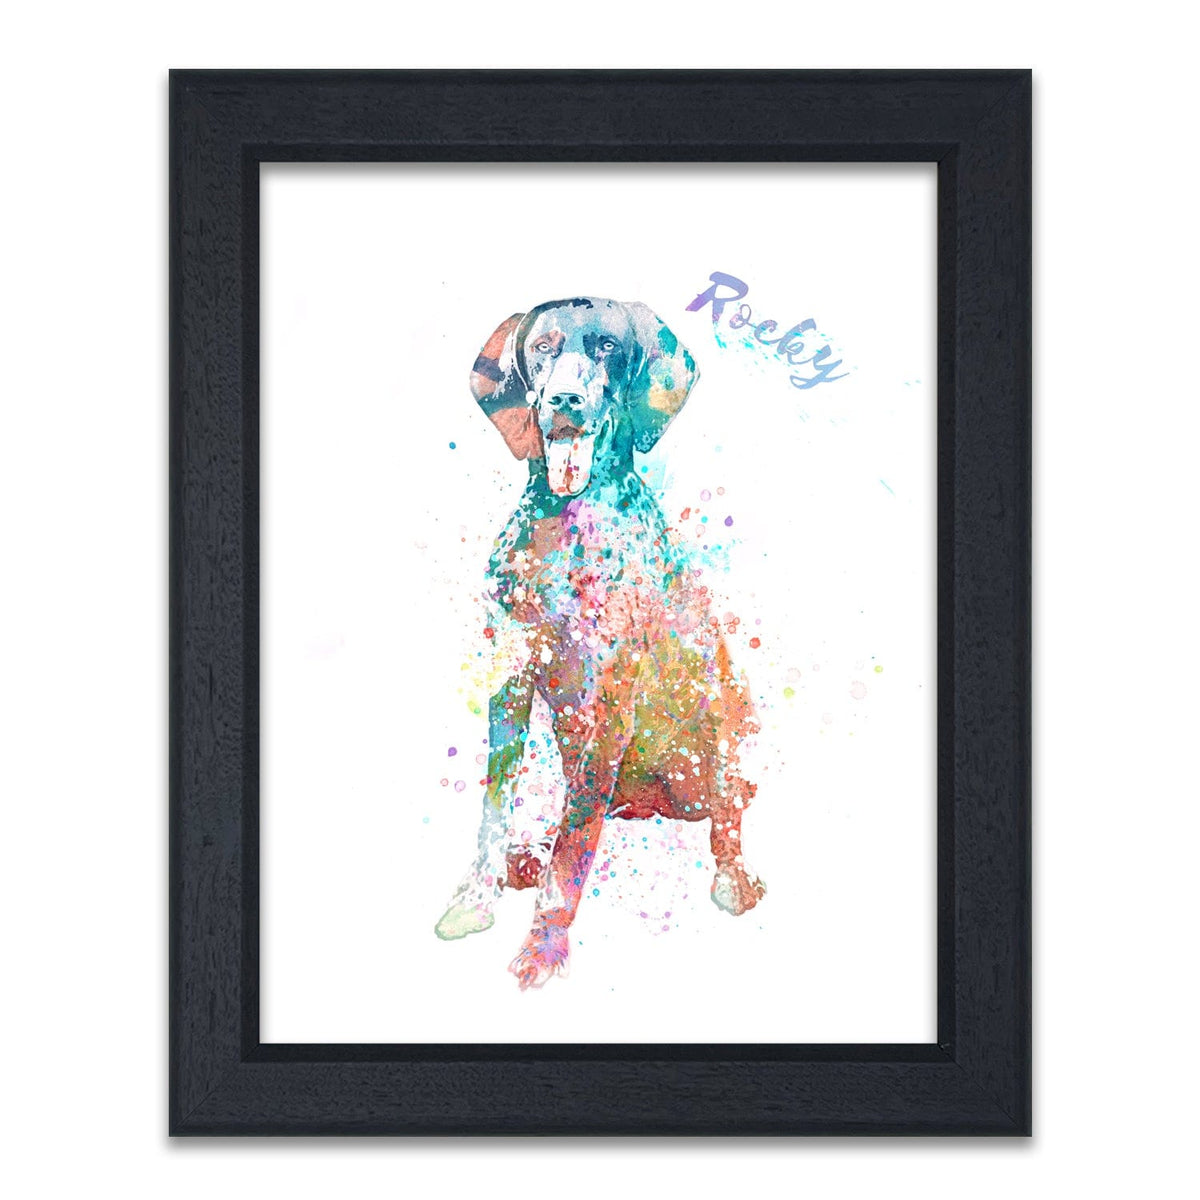 Framed Pointer Dog Watercolor Art from Personal-Prints